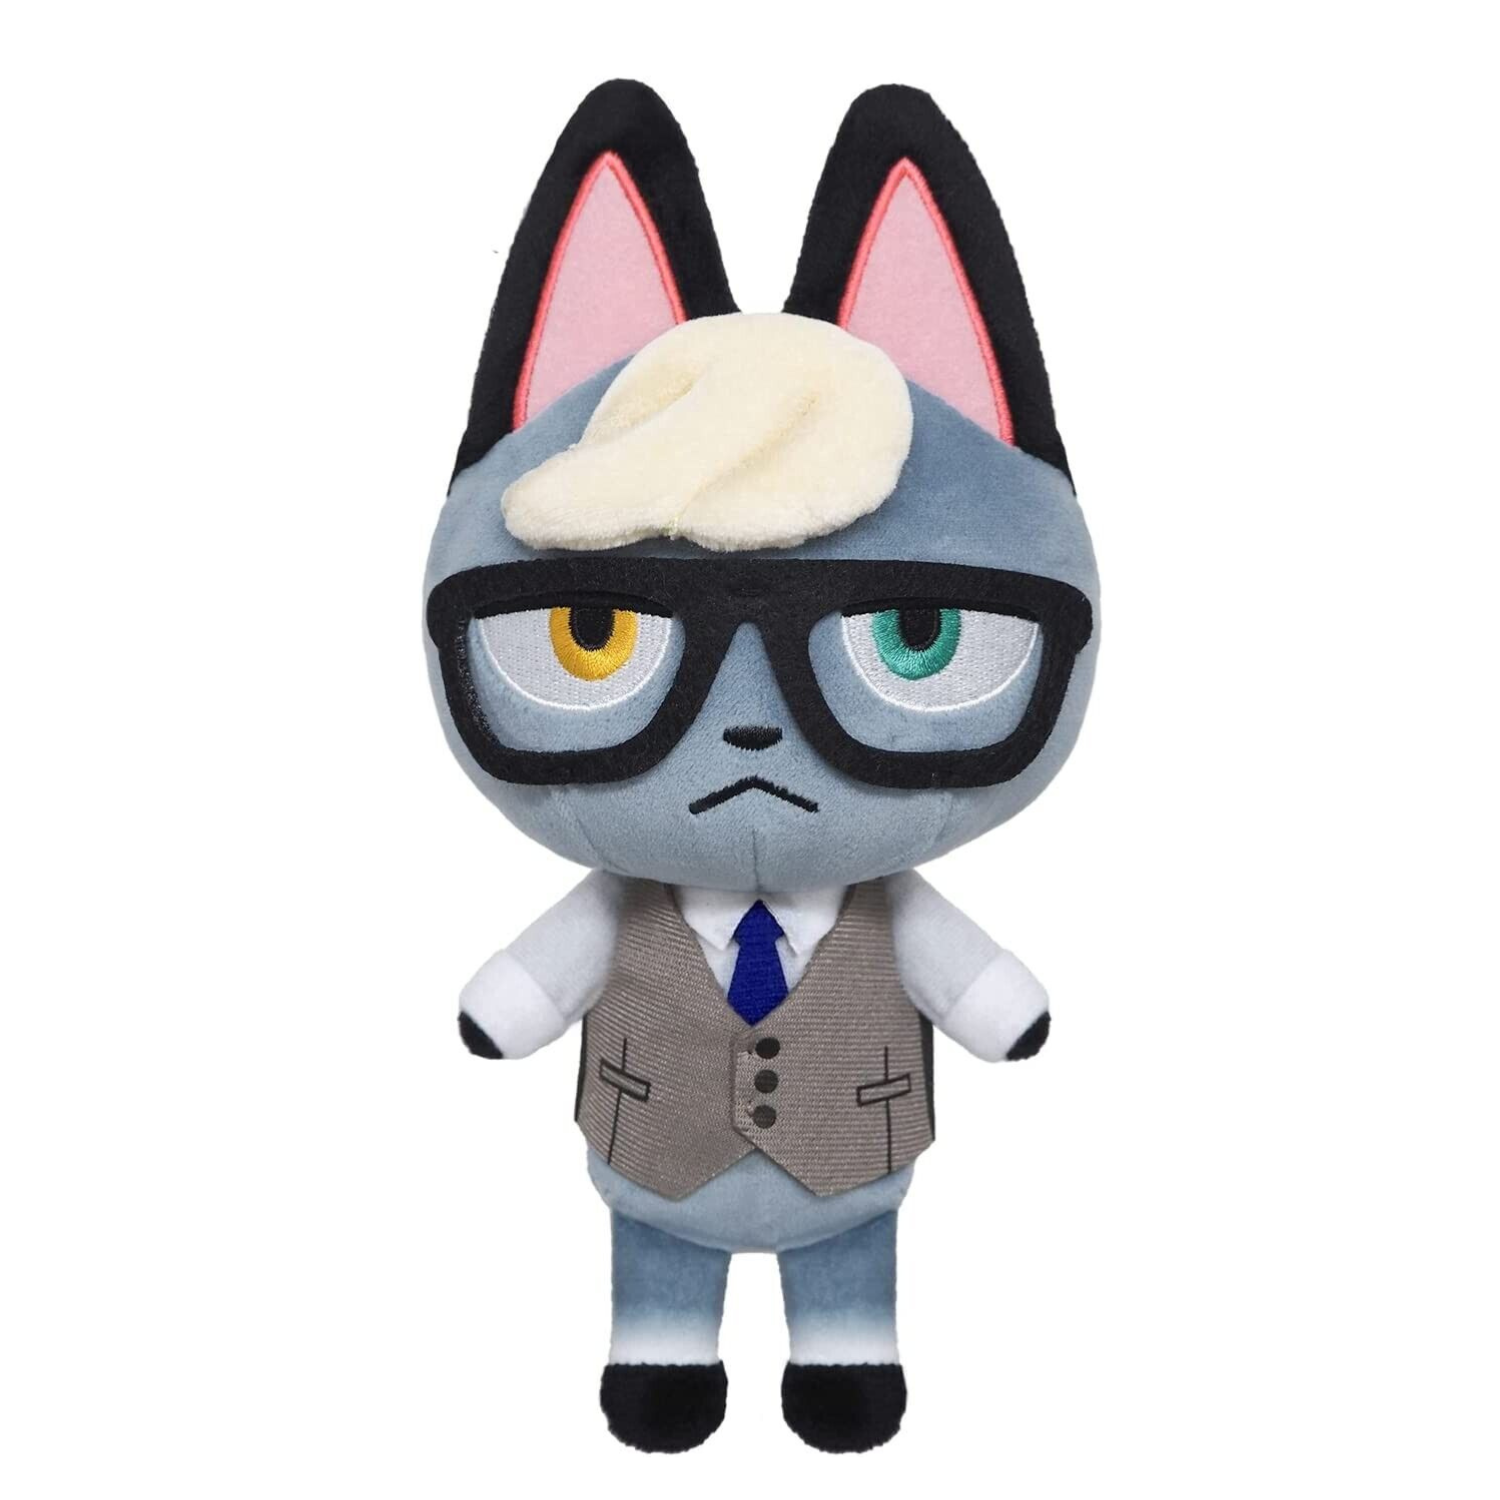 Raymond the cat plushie. He has grey fur and black ears, and one yellow eye and one green eye. He's wearing a grey vest with a blue necktie.